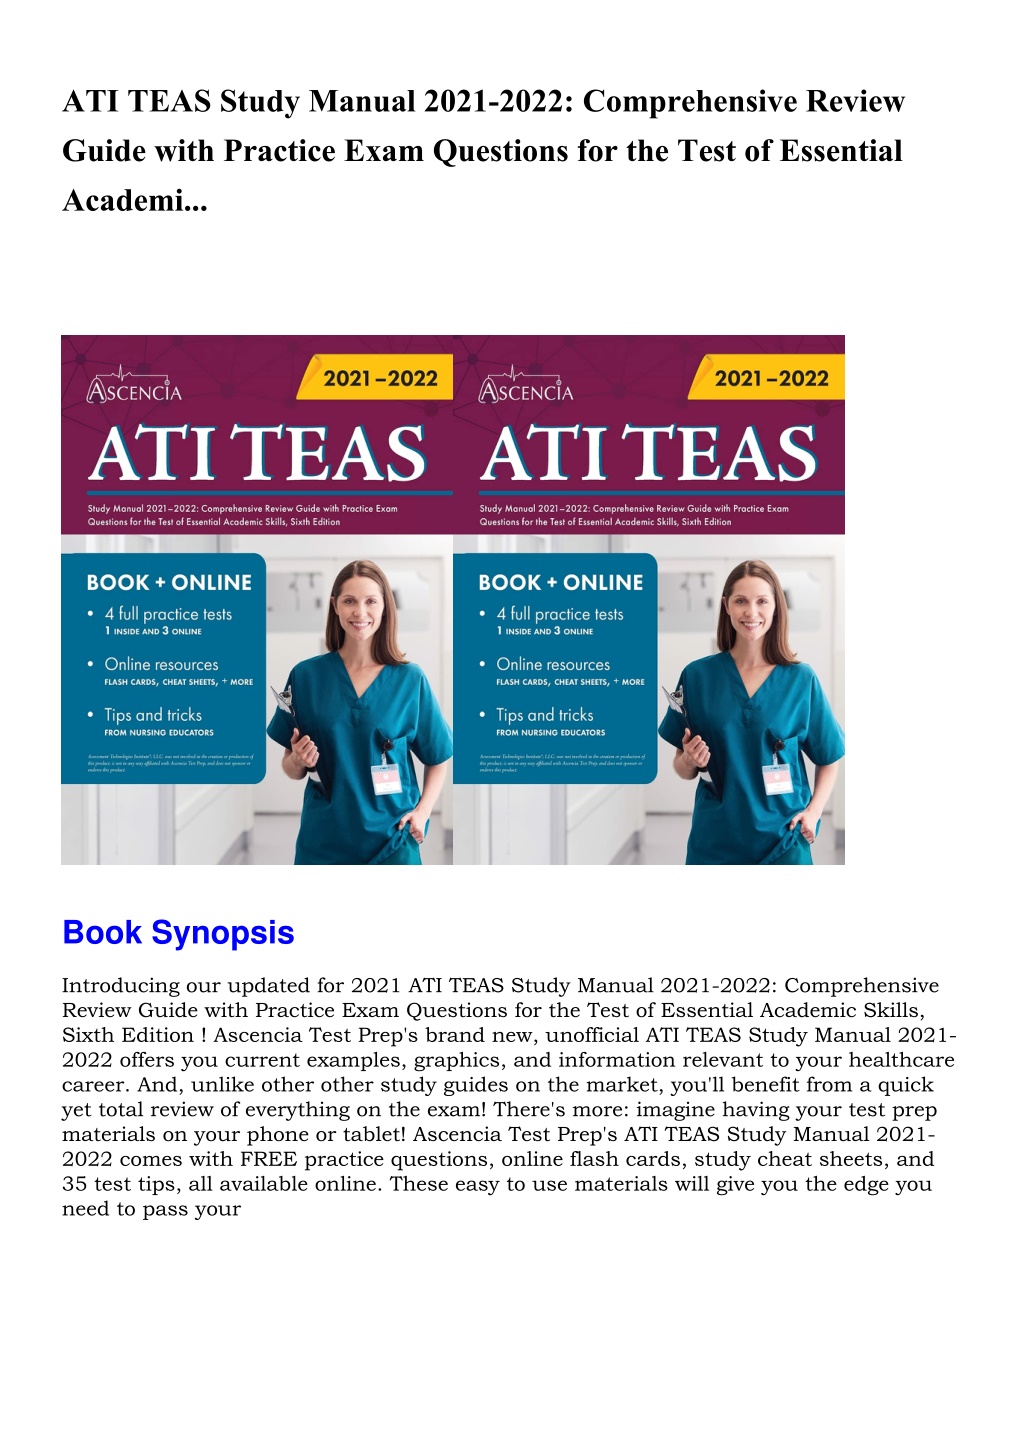 PPT READ ATI TEAS Study Manual 2021 2022 Comprehensive Review Guide